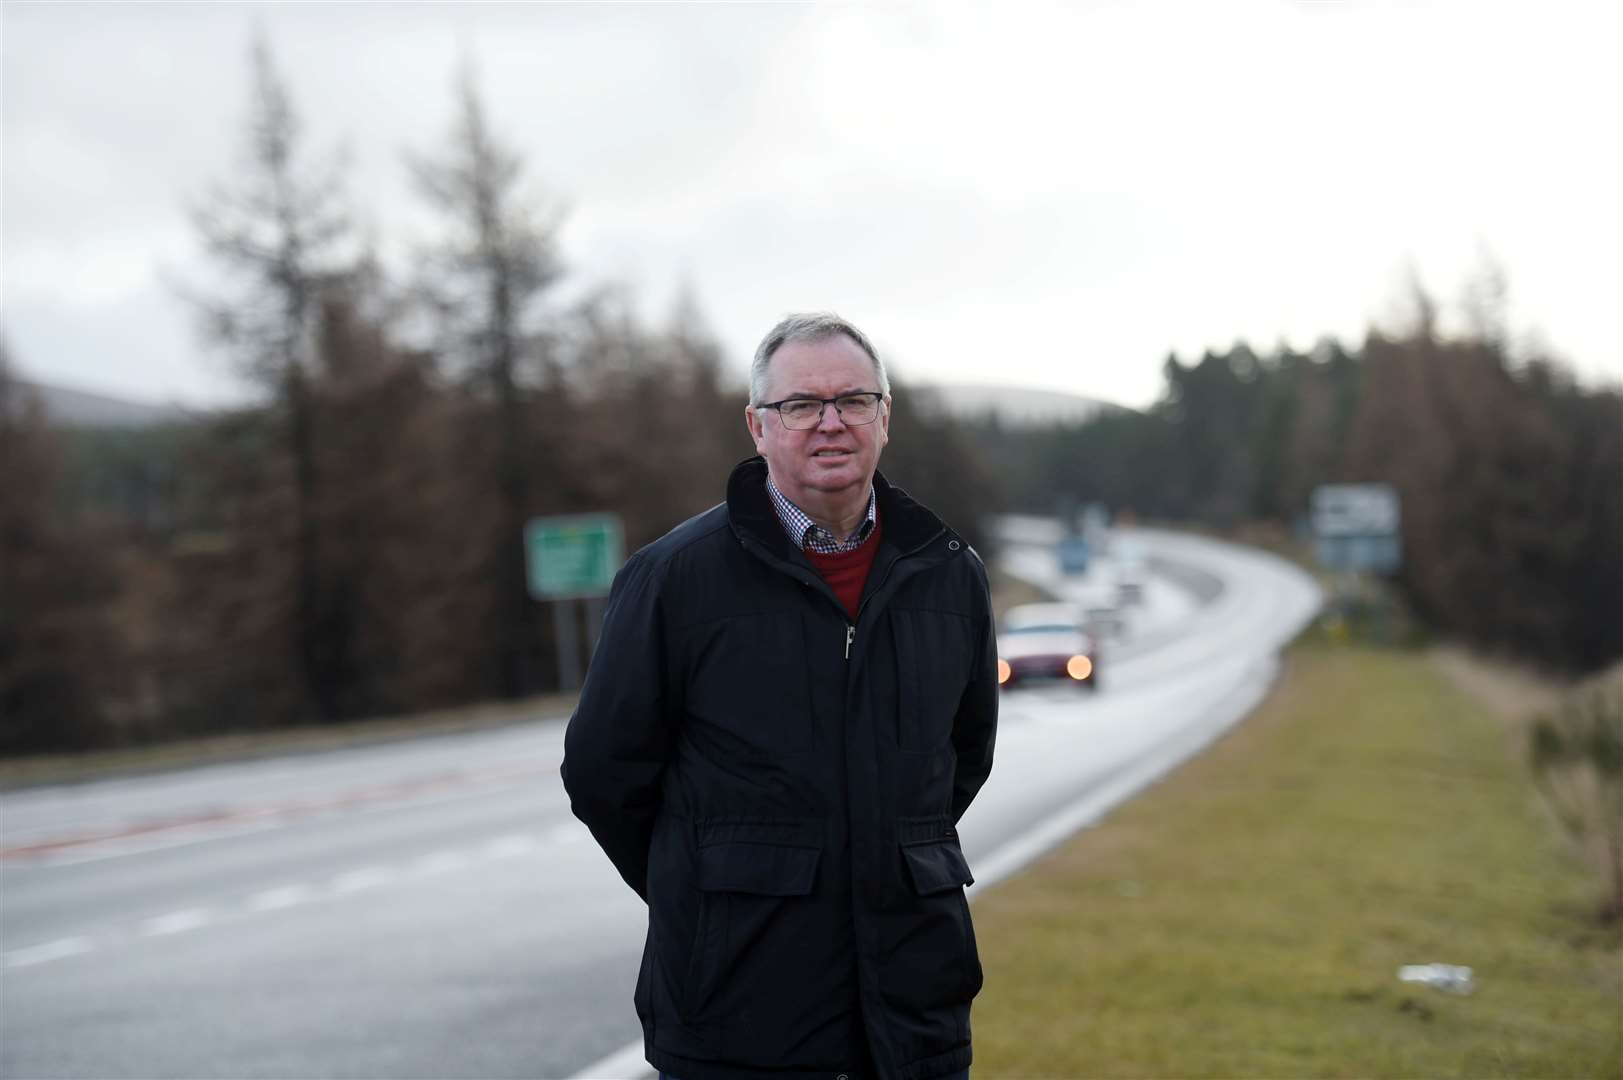 George Rennie, a former chartered engineer says the 2025 commitment to dual the A9 has been “unachievable” since 2011. Picture: Callum Mackay.